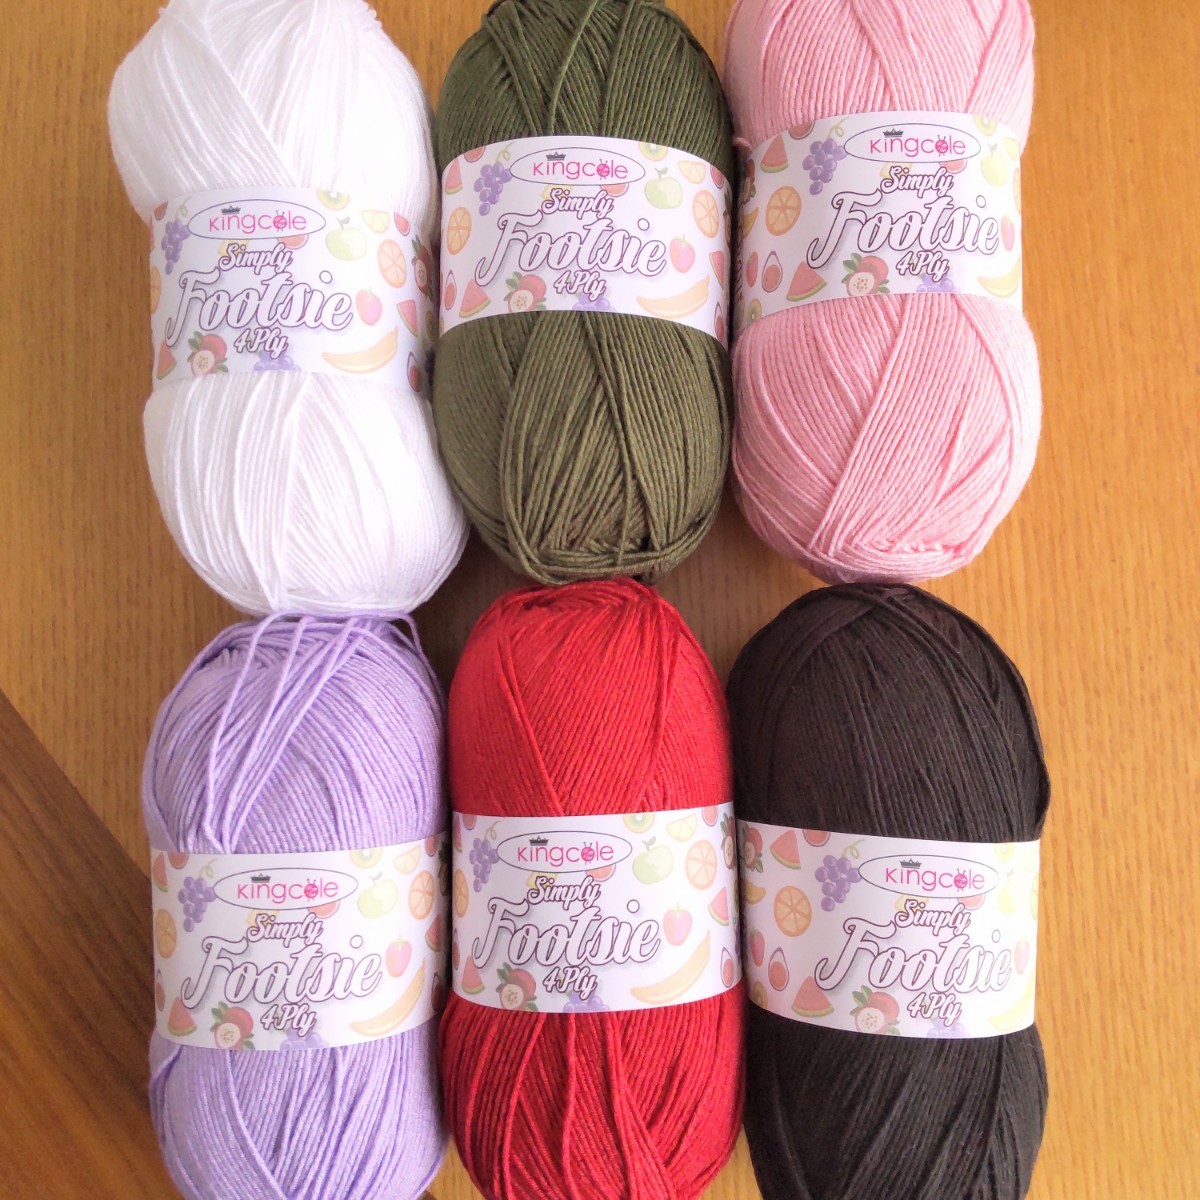 King cole キングコール　Simply Footsie　4ply 　毛糸